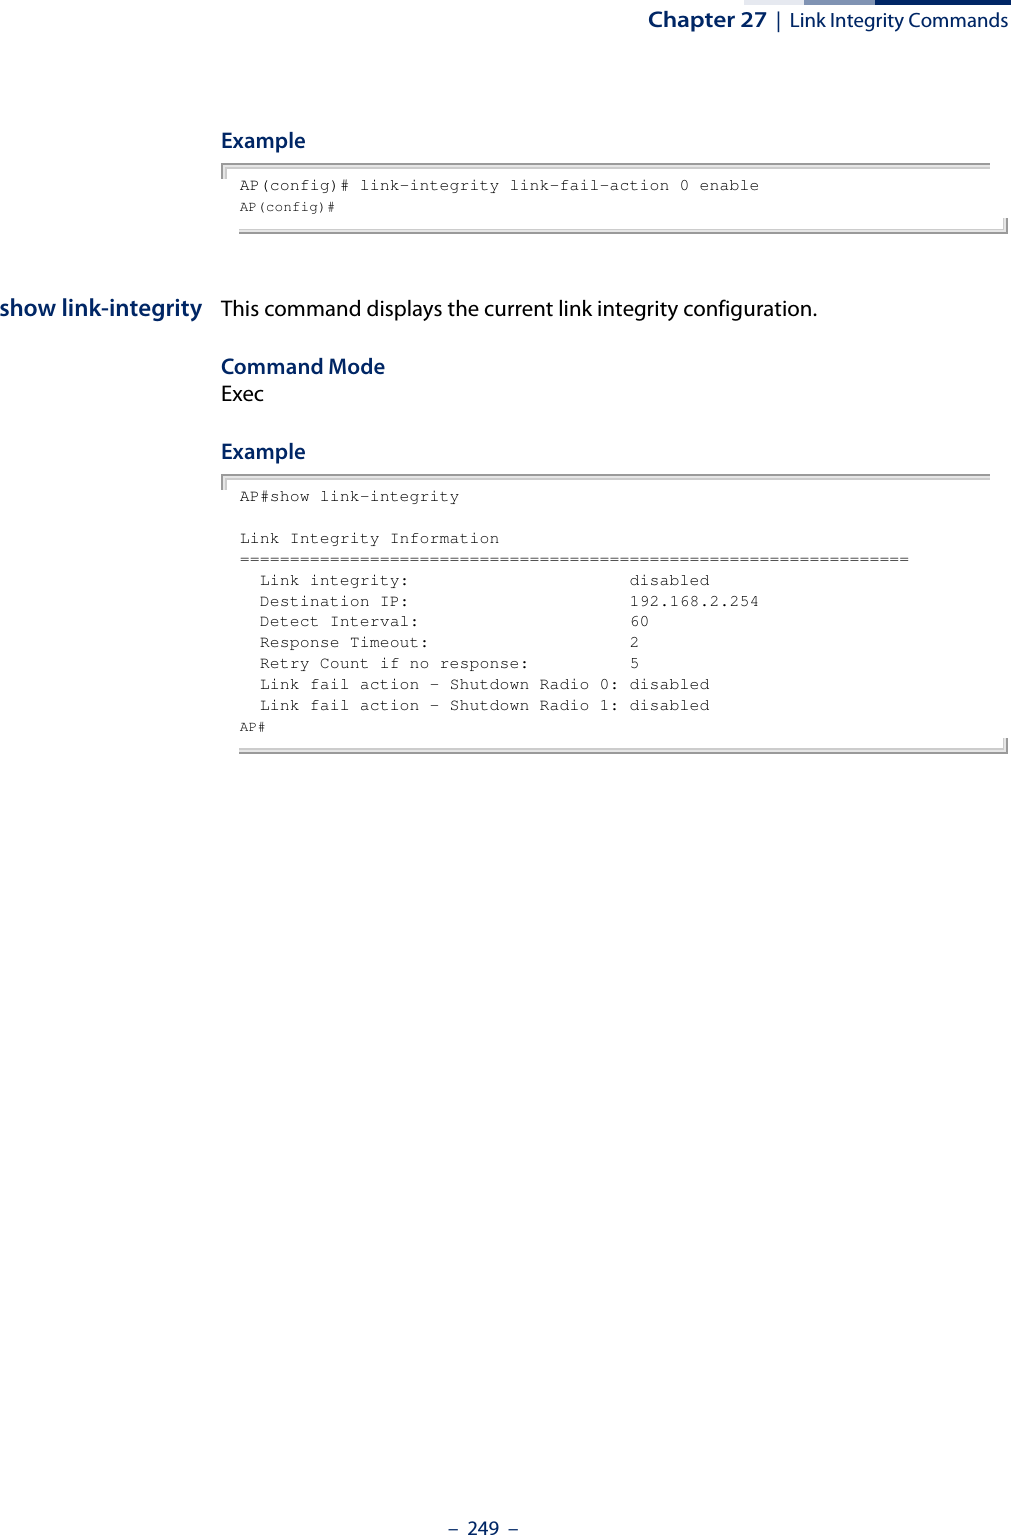 Chapter 27  |  Link Integrity Commands–  249  –ExampleAP(config)# link-integrity link-fail-action 0 enableAP(config)# show link-integrity This command displays the current link integrity configuration.Command Mode ExecExampleAP#show link-integrityLink Integrity Information===================================================================  Link integrity:                      disabled  Destination IP:                      192.168.2.254  Detect Interval:                     60  Response Timeout:                    2  Retry Count if no response:          5  Link fail action - Shutdown Radio 0: disabled  Link fail action - Shutdown Radio 1: disabledAP# 